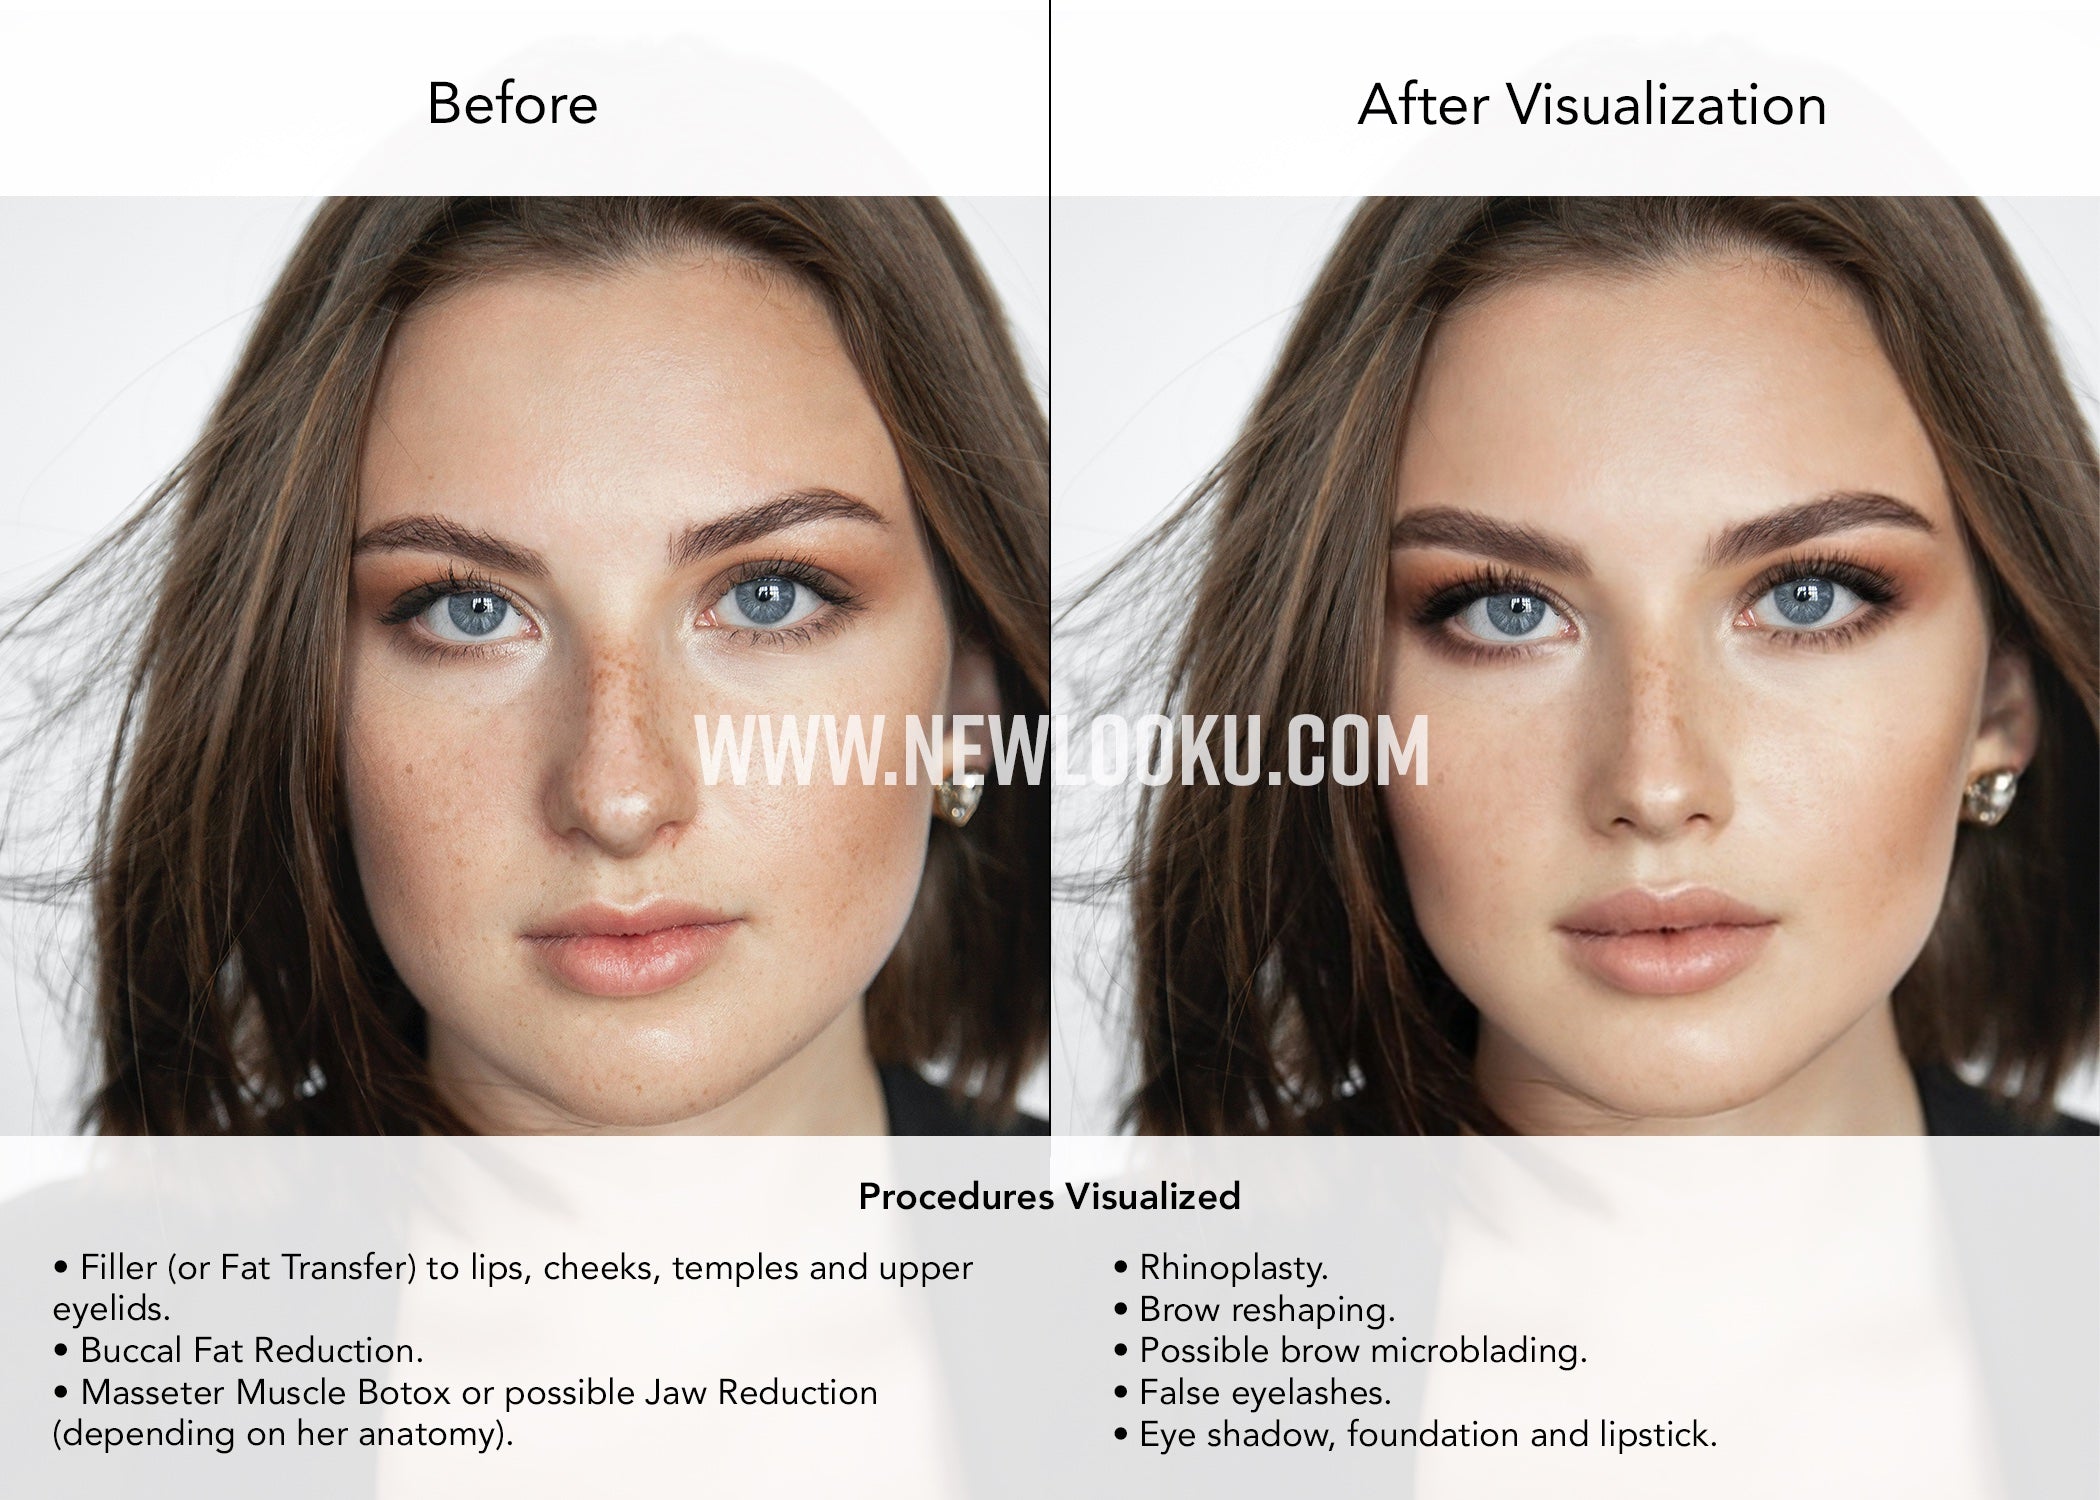 Female Plastic Surgery Simulation Service Before & After Photo.